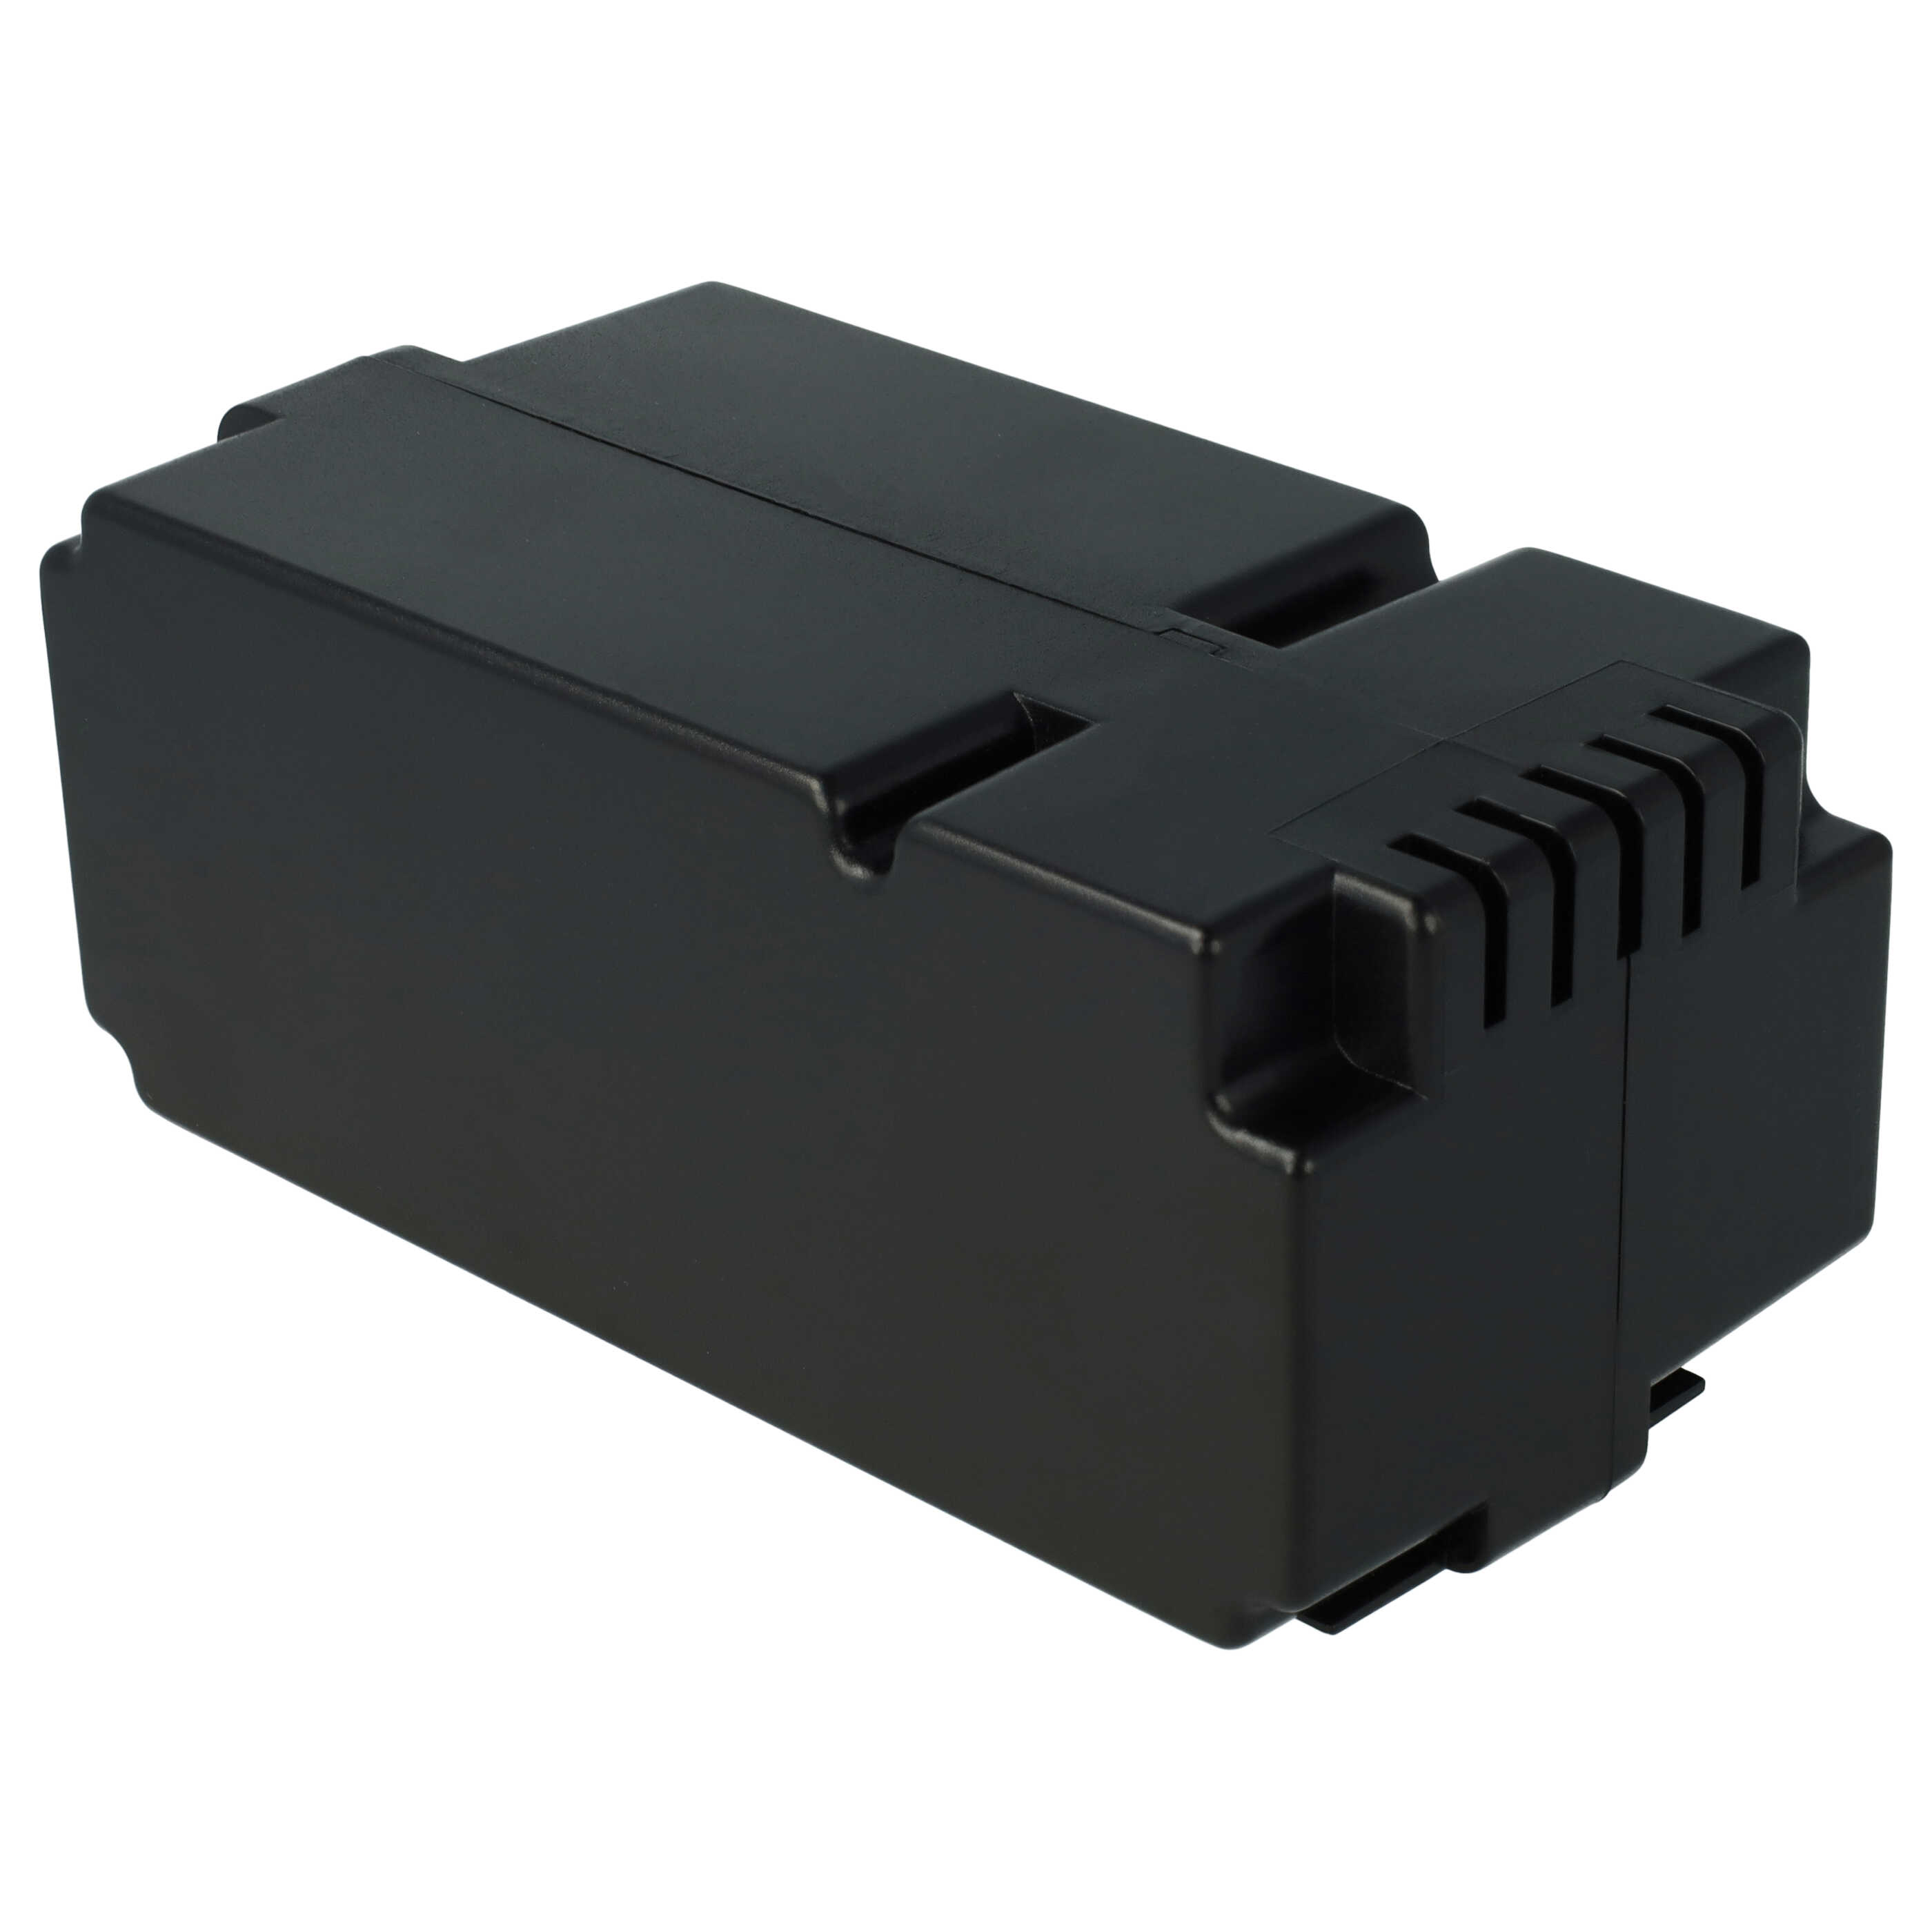 Lawnmower Battery Replacement for Yard Force 862601, 862615, 0862622, 0862622001 - 2000mAh 25.2V Li-Ion